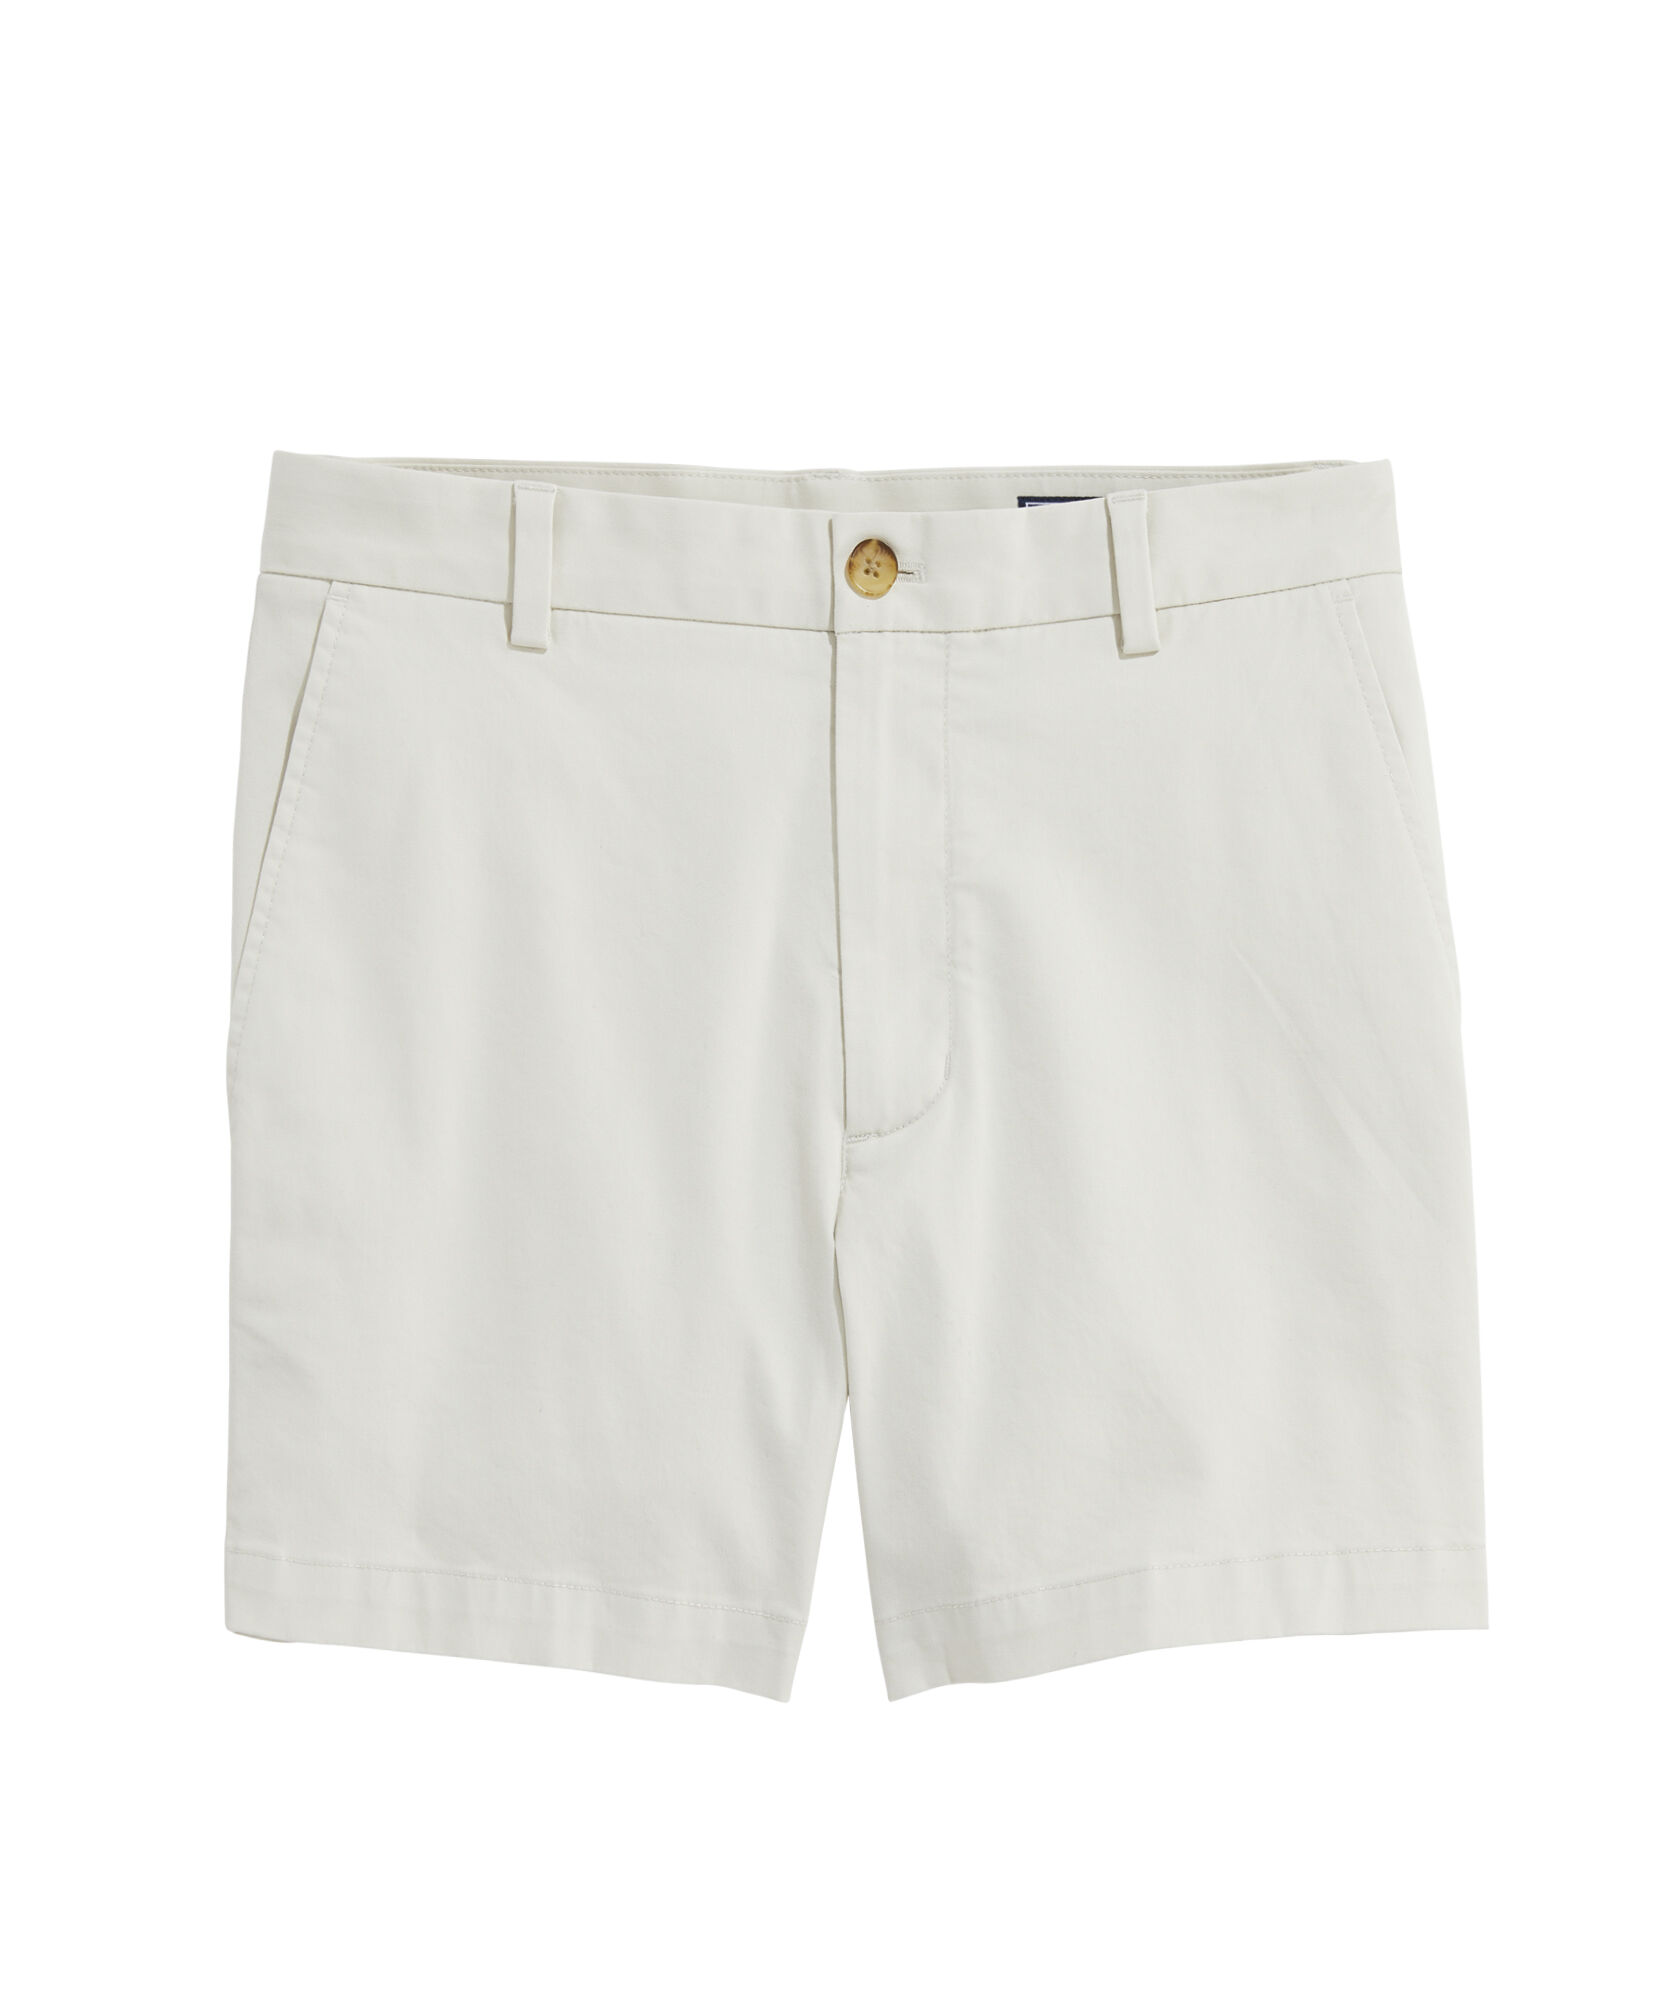 OUTLET 5 Inch Stretch Breaker Shorts